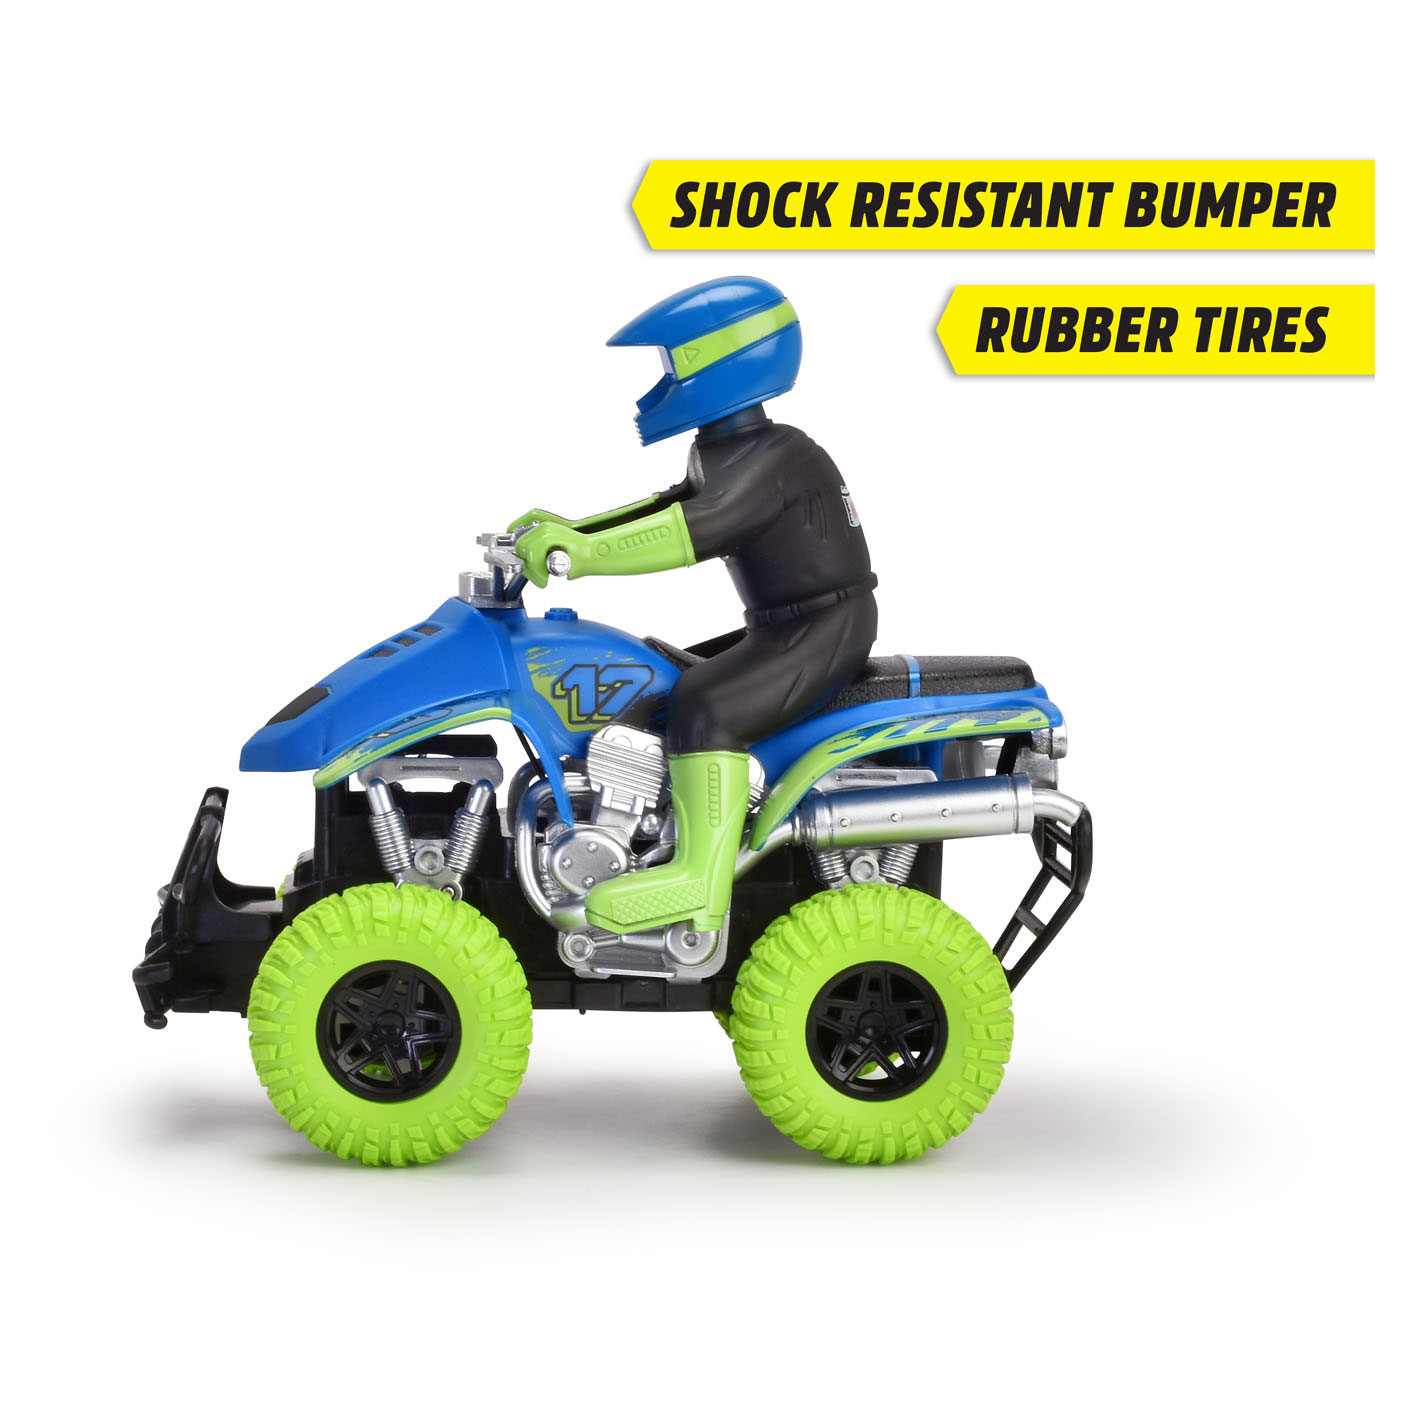 Dickie RC Offroad Quad Voiture orientable